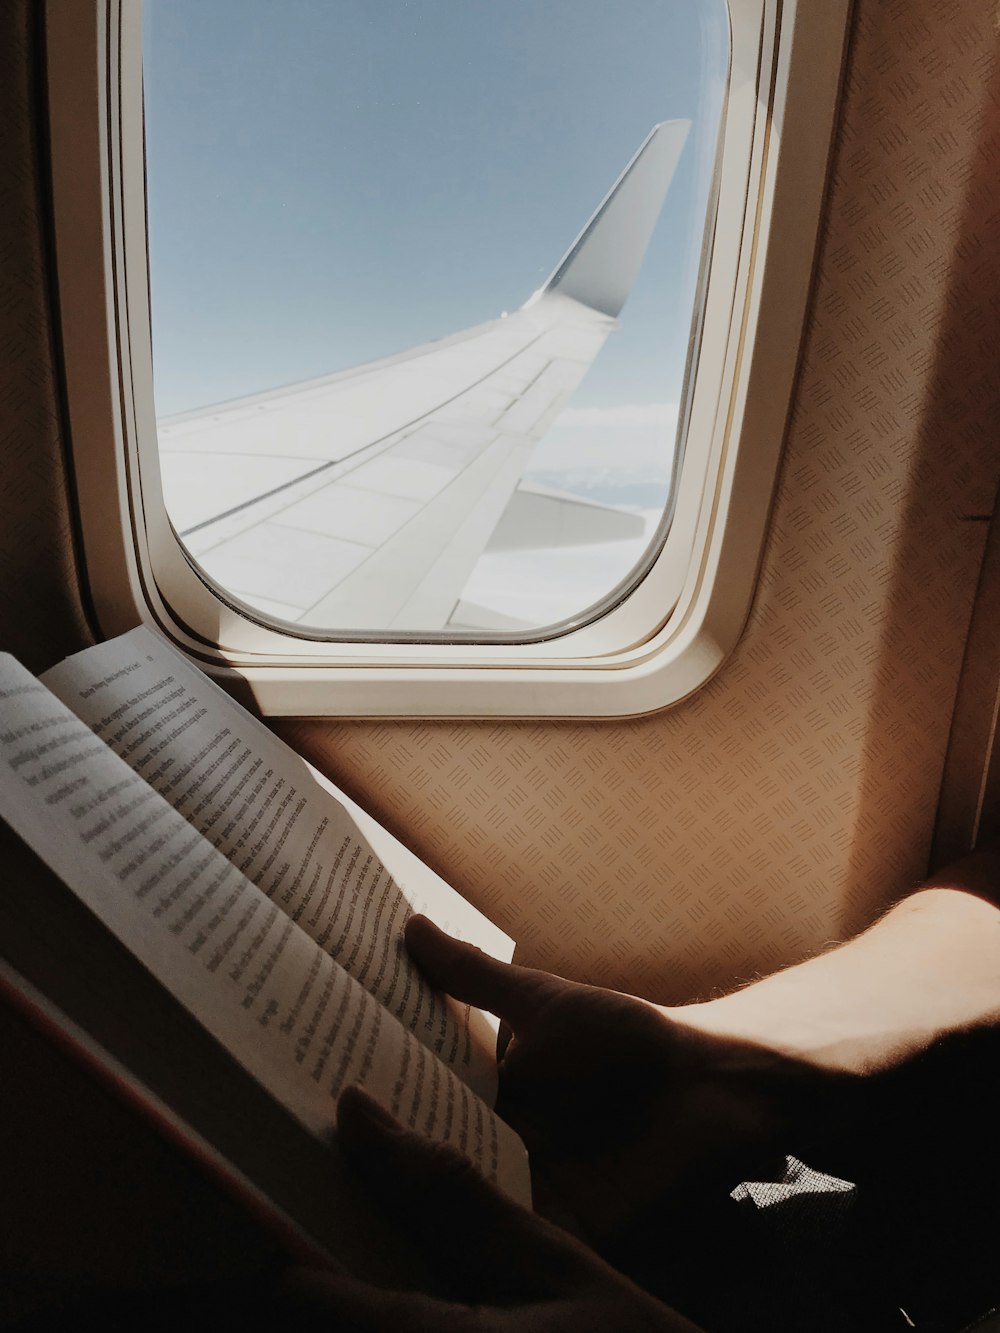 person reading book beside airplane window